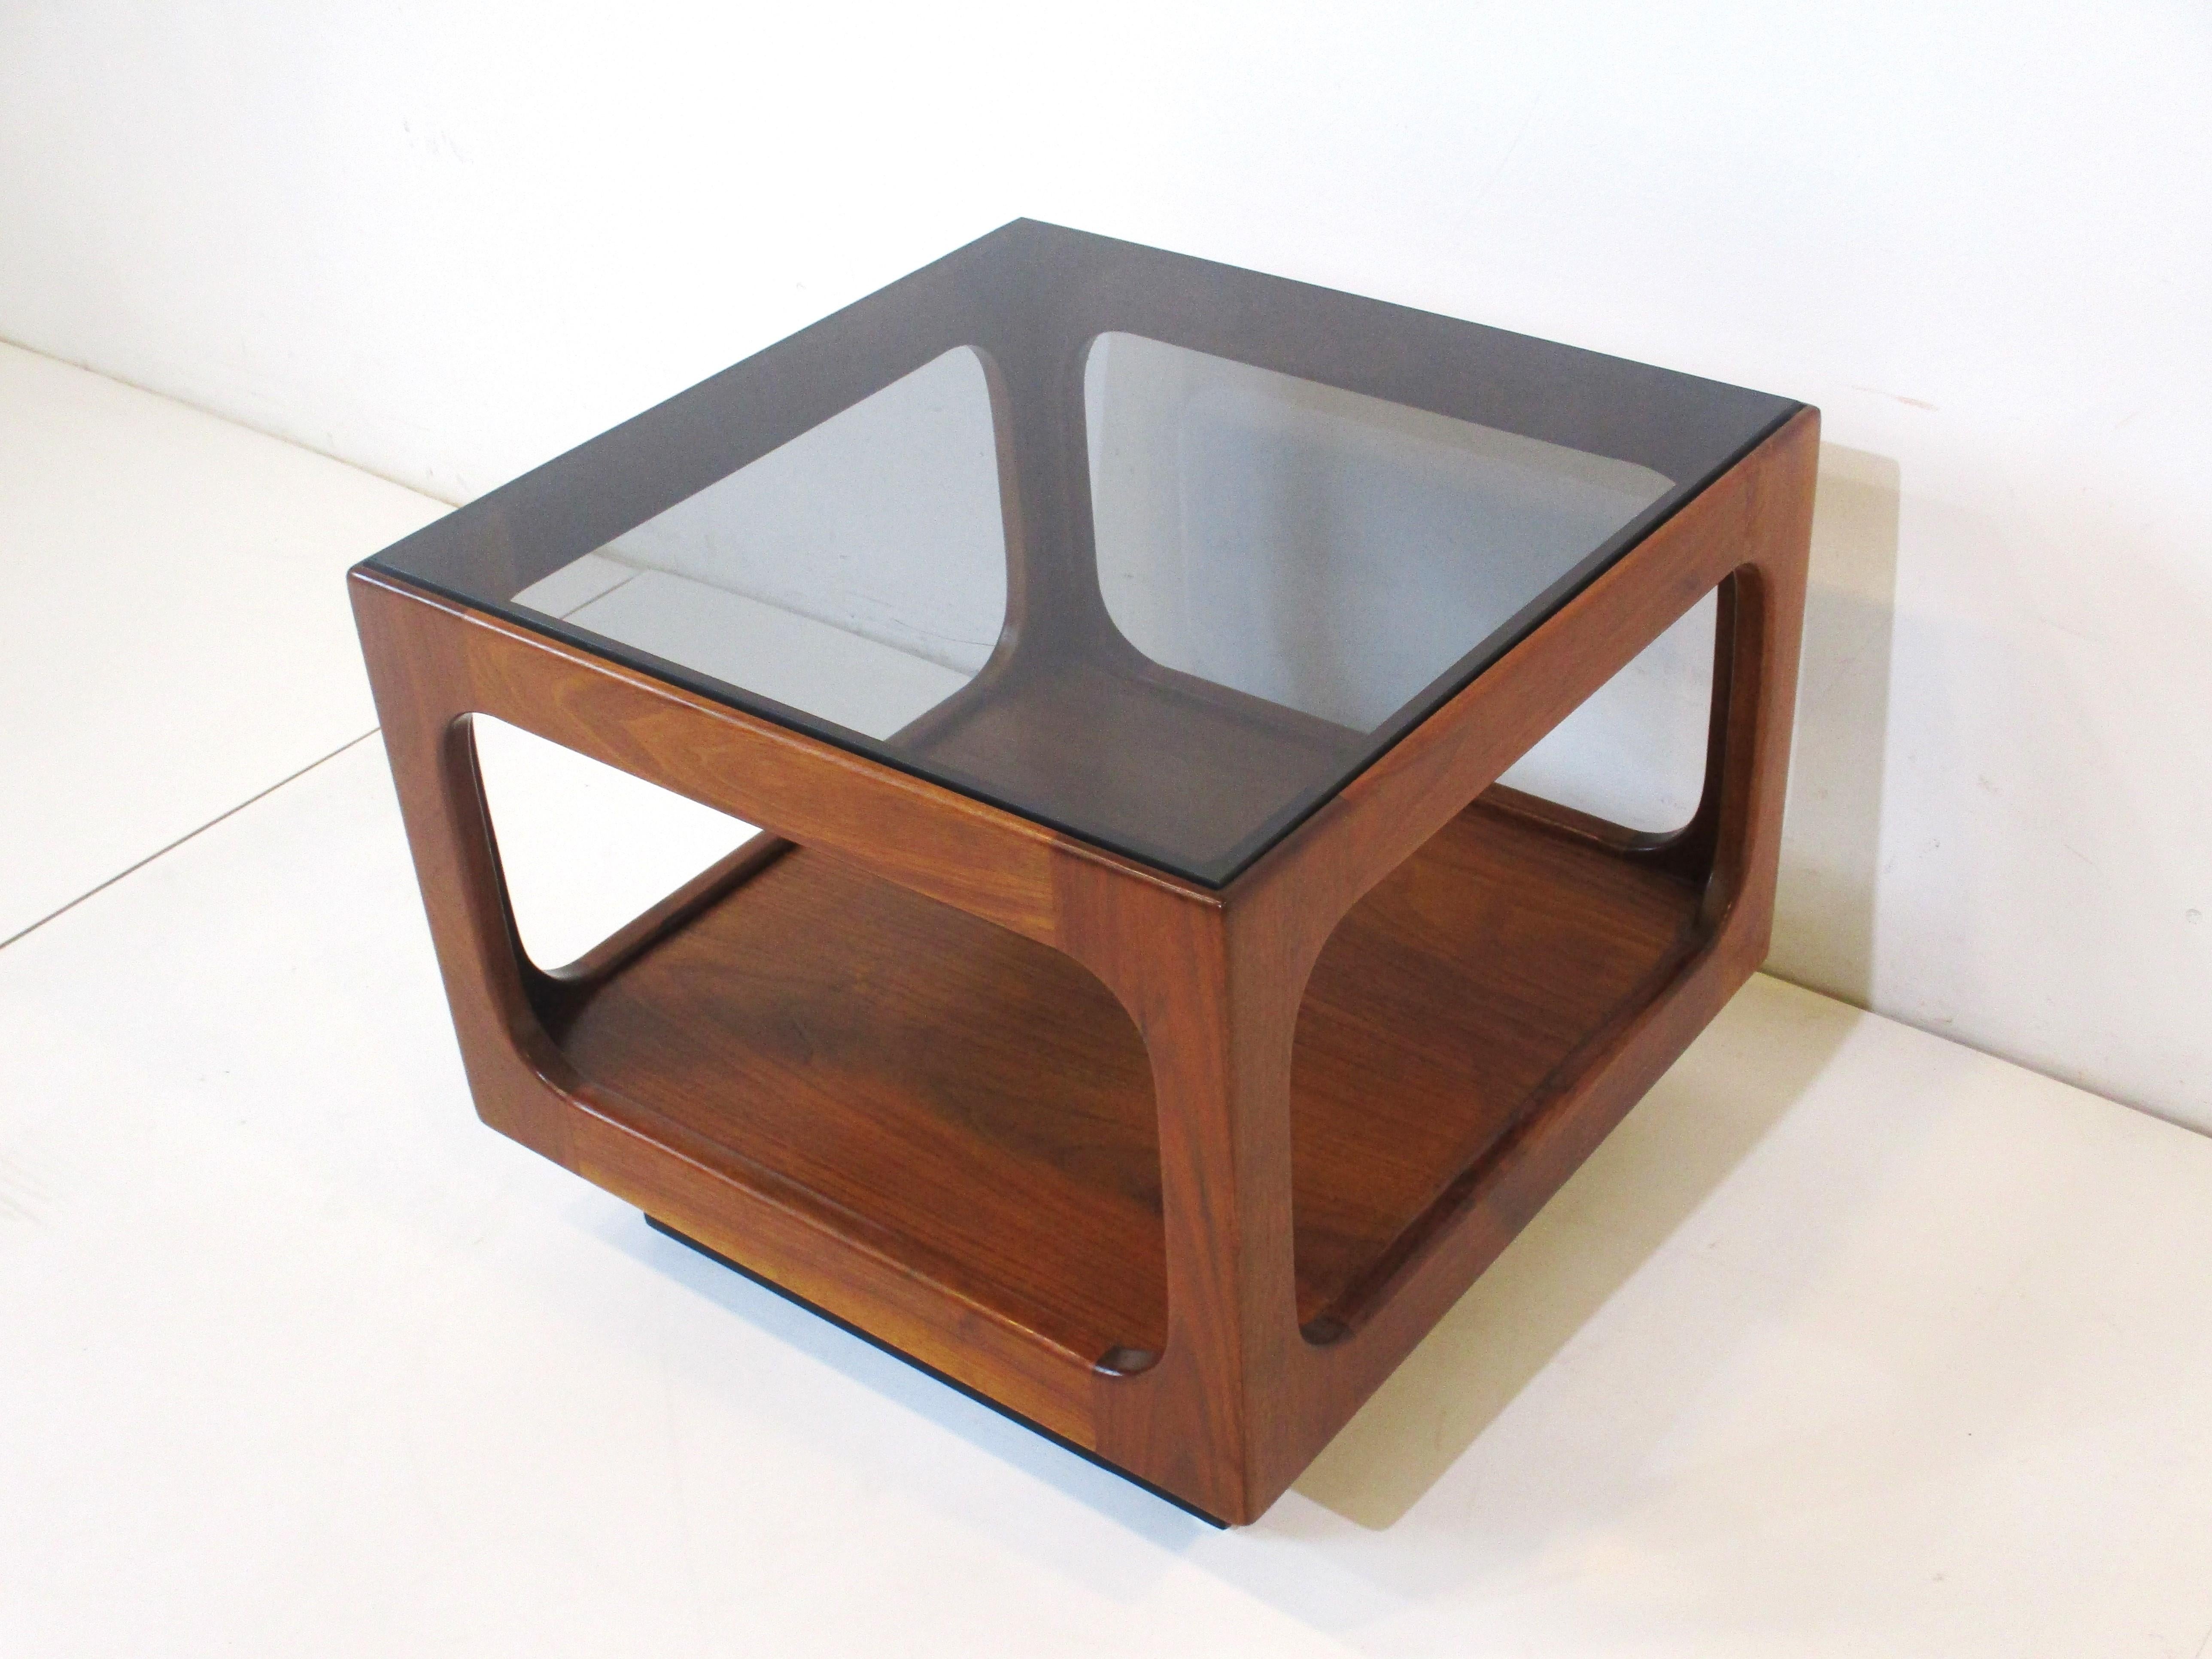 A very well crafted Danish styled walnut Cube side table with a lightly smoked glass top. Having a lower storage area and with the satin black kick base gives the piece a floating look and light feel. Designed and hand manufactured by Otmar who